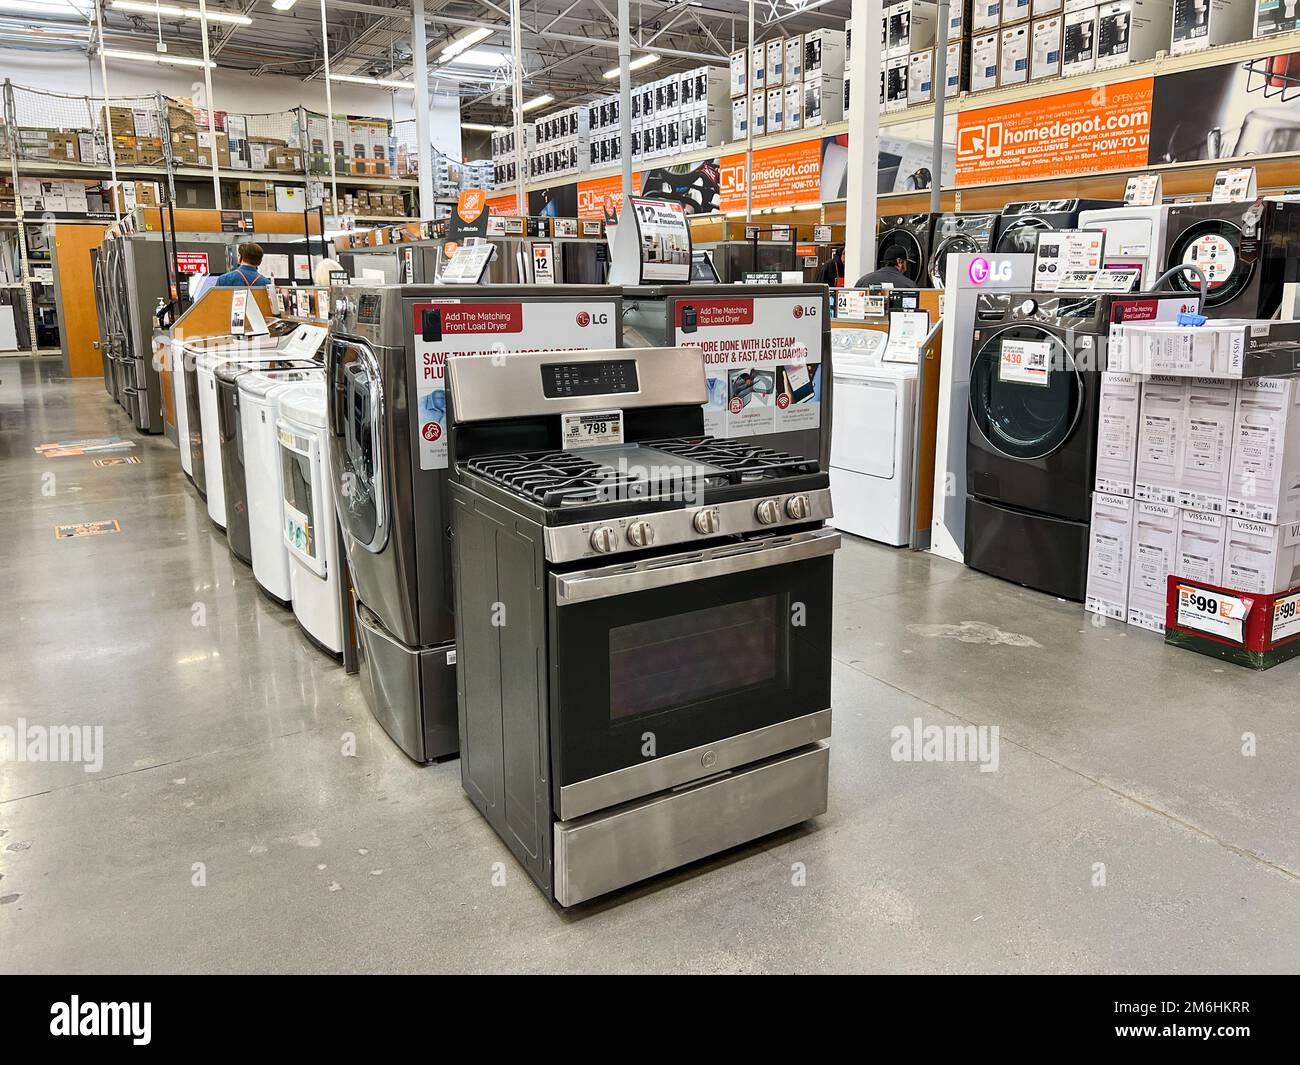 https://c8.alamy.com/comp/2M6HKRR/several-kitchen-electronic-units-for-sale-at-the-home-depot-carmel-valley-san-diego-2M6HKRR.jpg